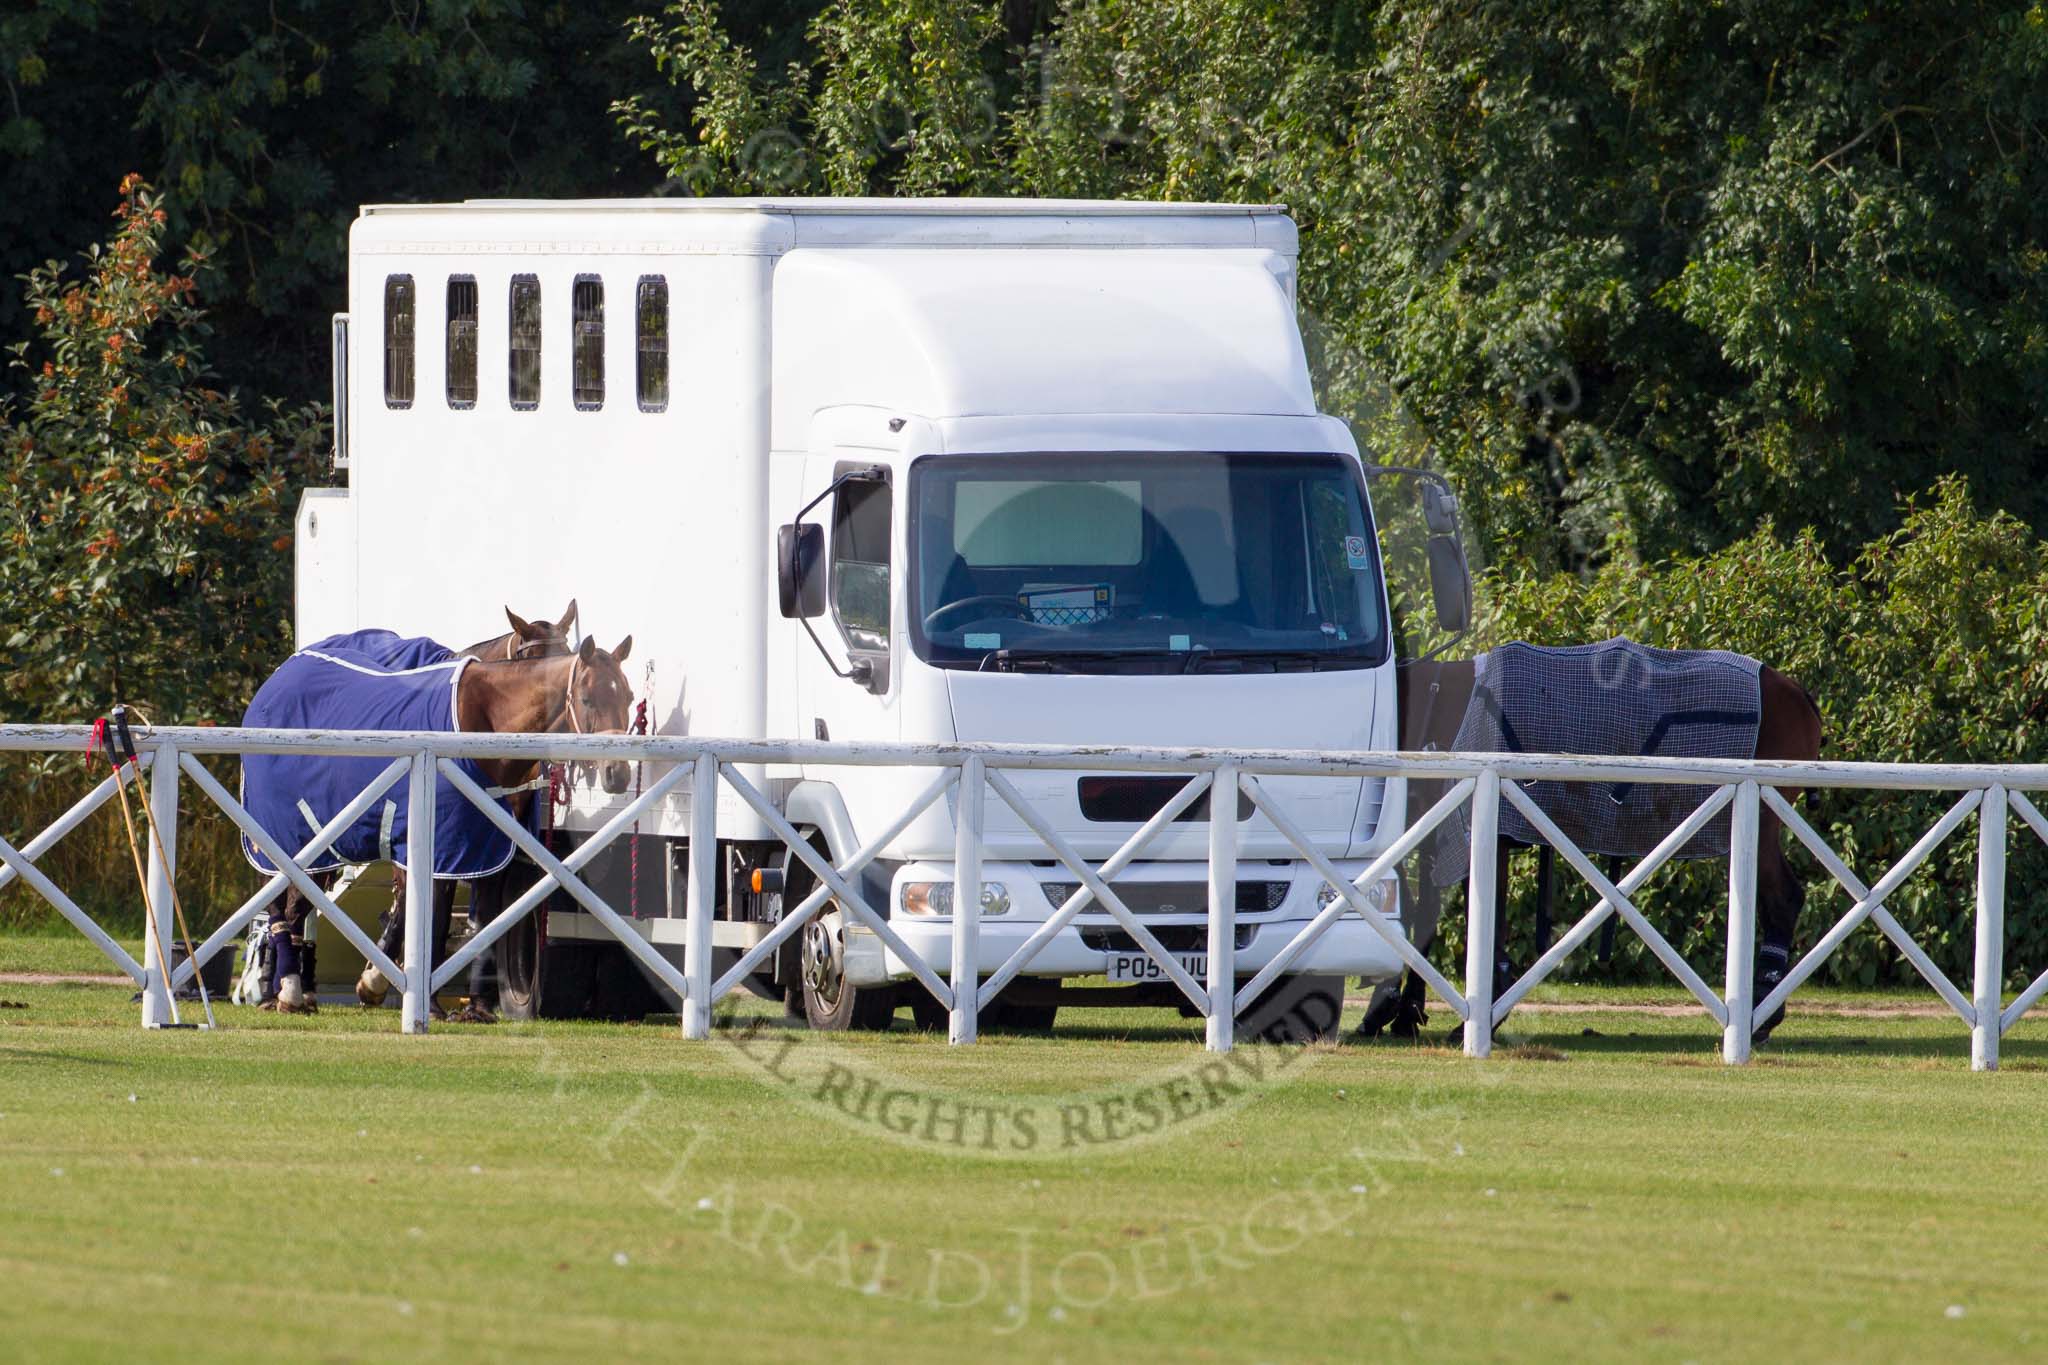 DBPC Polo in the Park 2013.
Dallas Burston Polo Club, ,
Southam,
Warwickshire,
United Kingdom,
on 01 September 2013 at 10:13, image #19